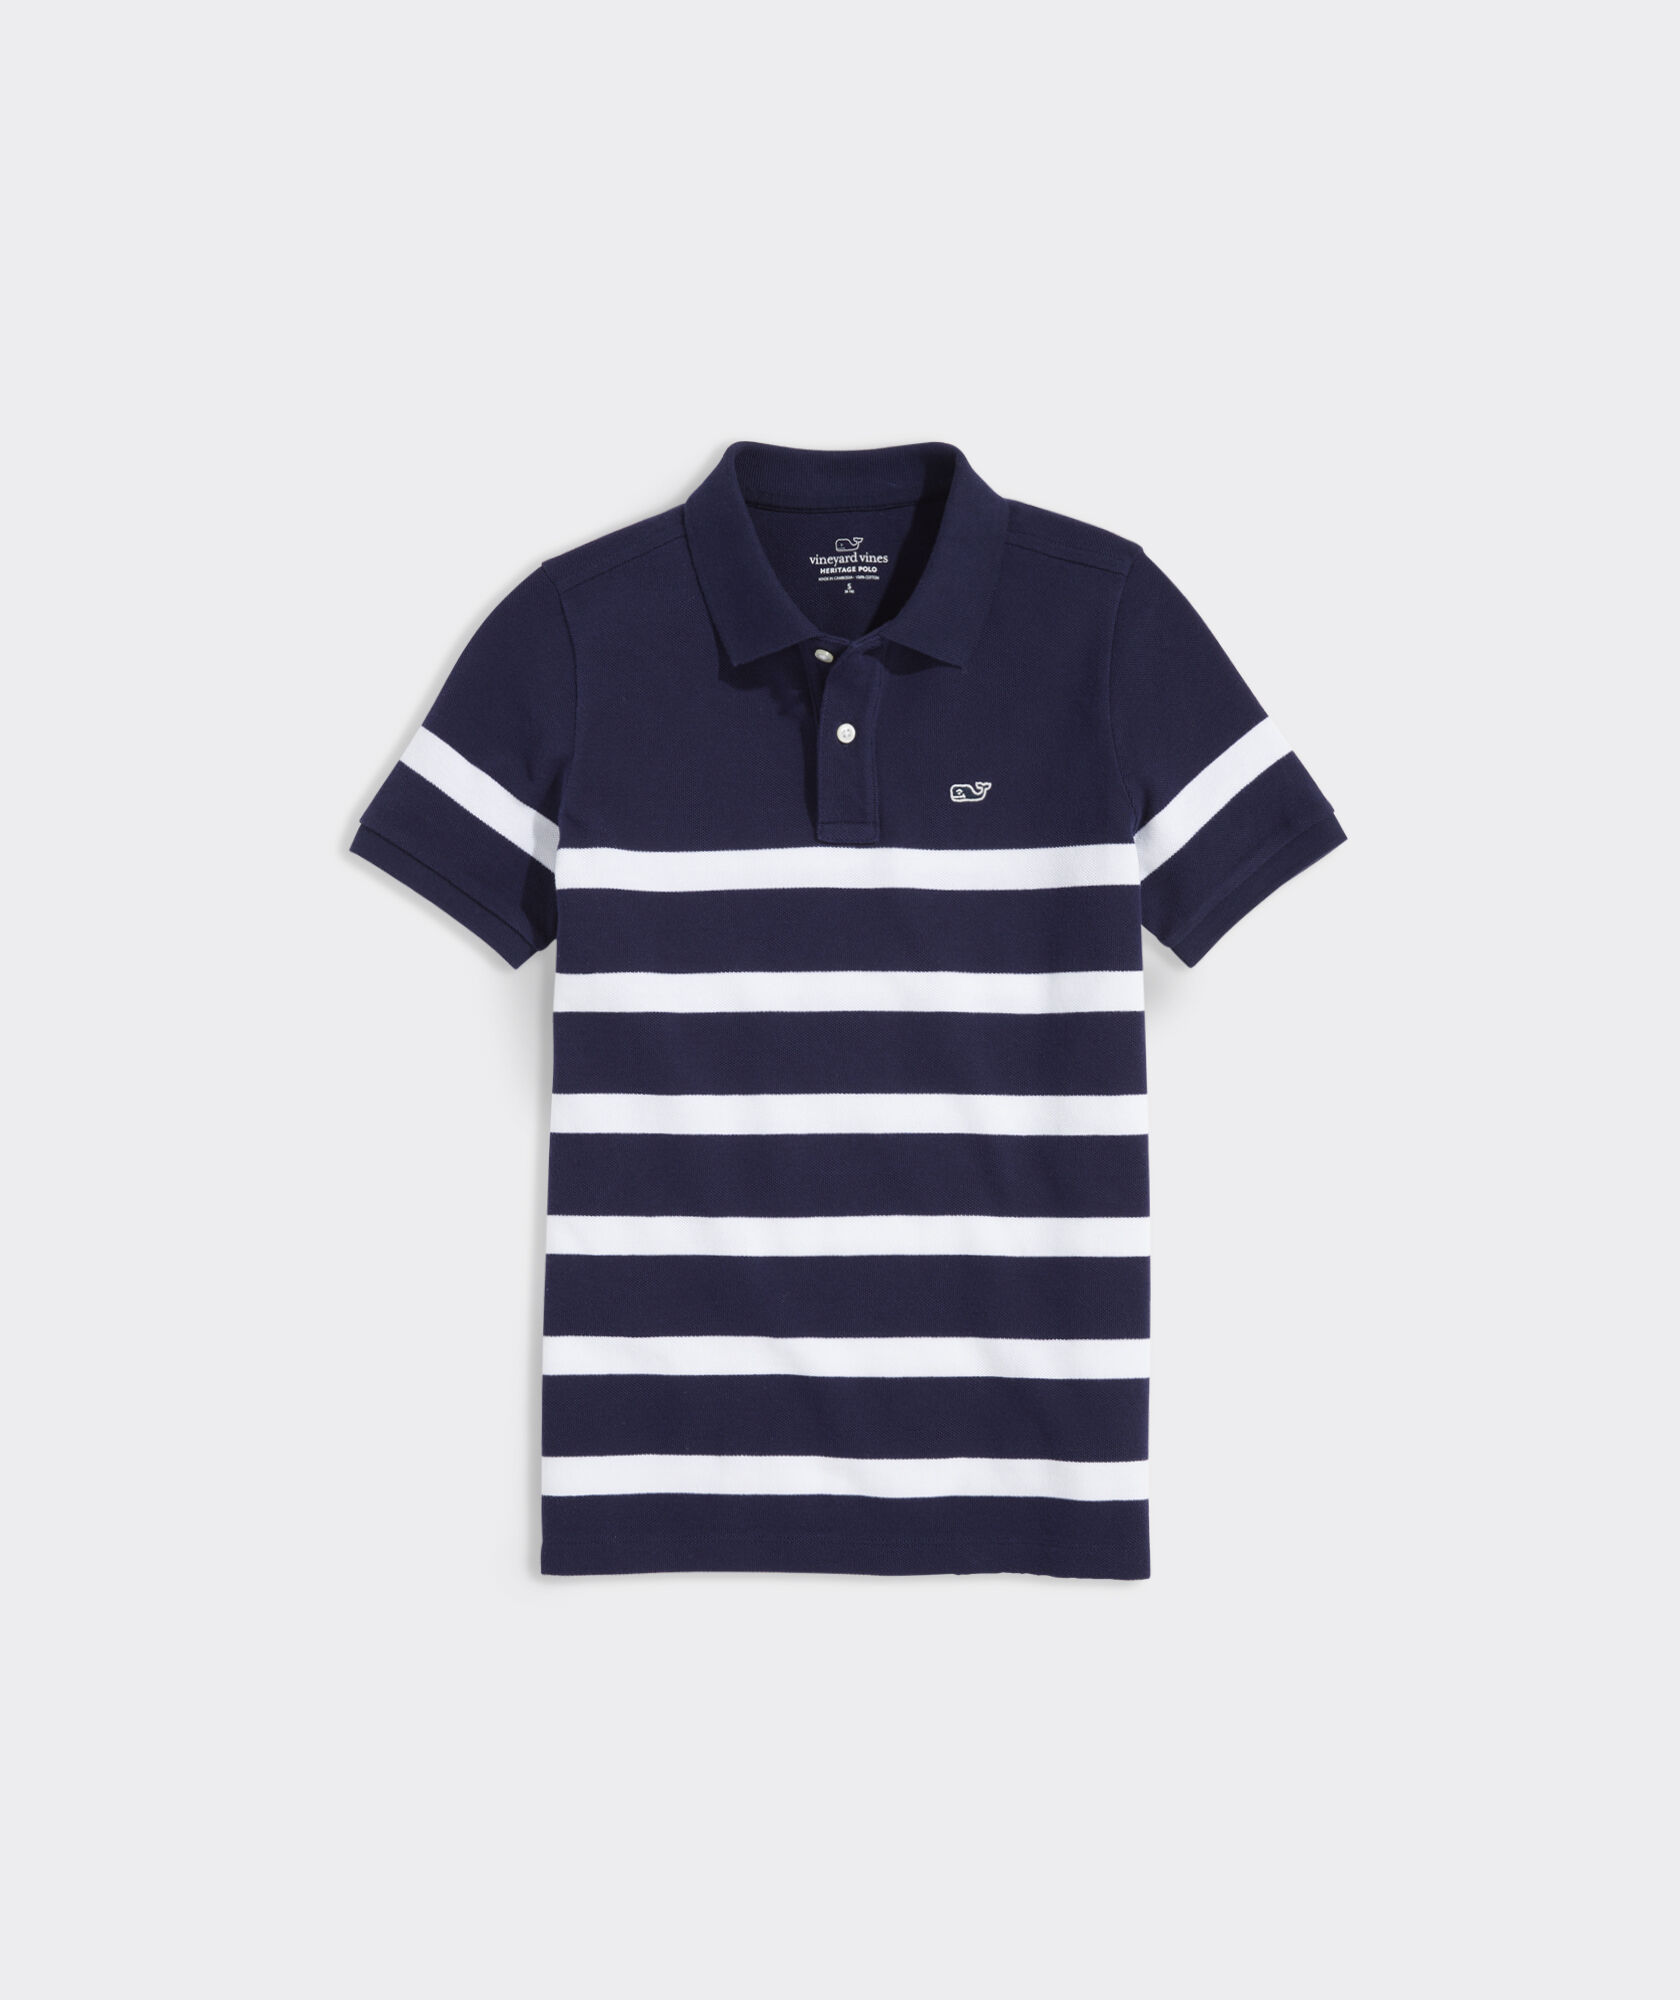 Hollister heritage icon logo heritage slim fit polo in white